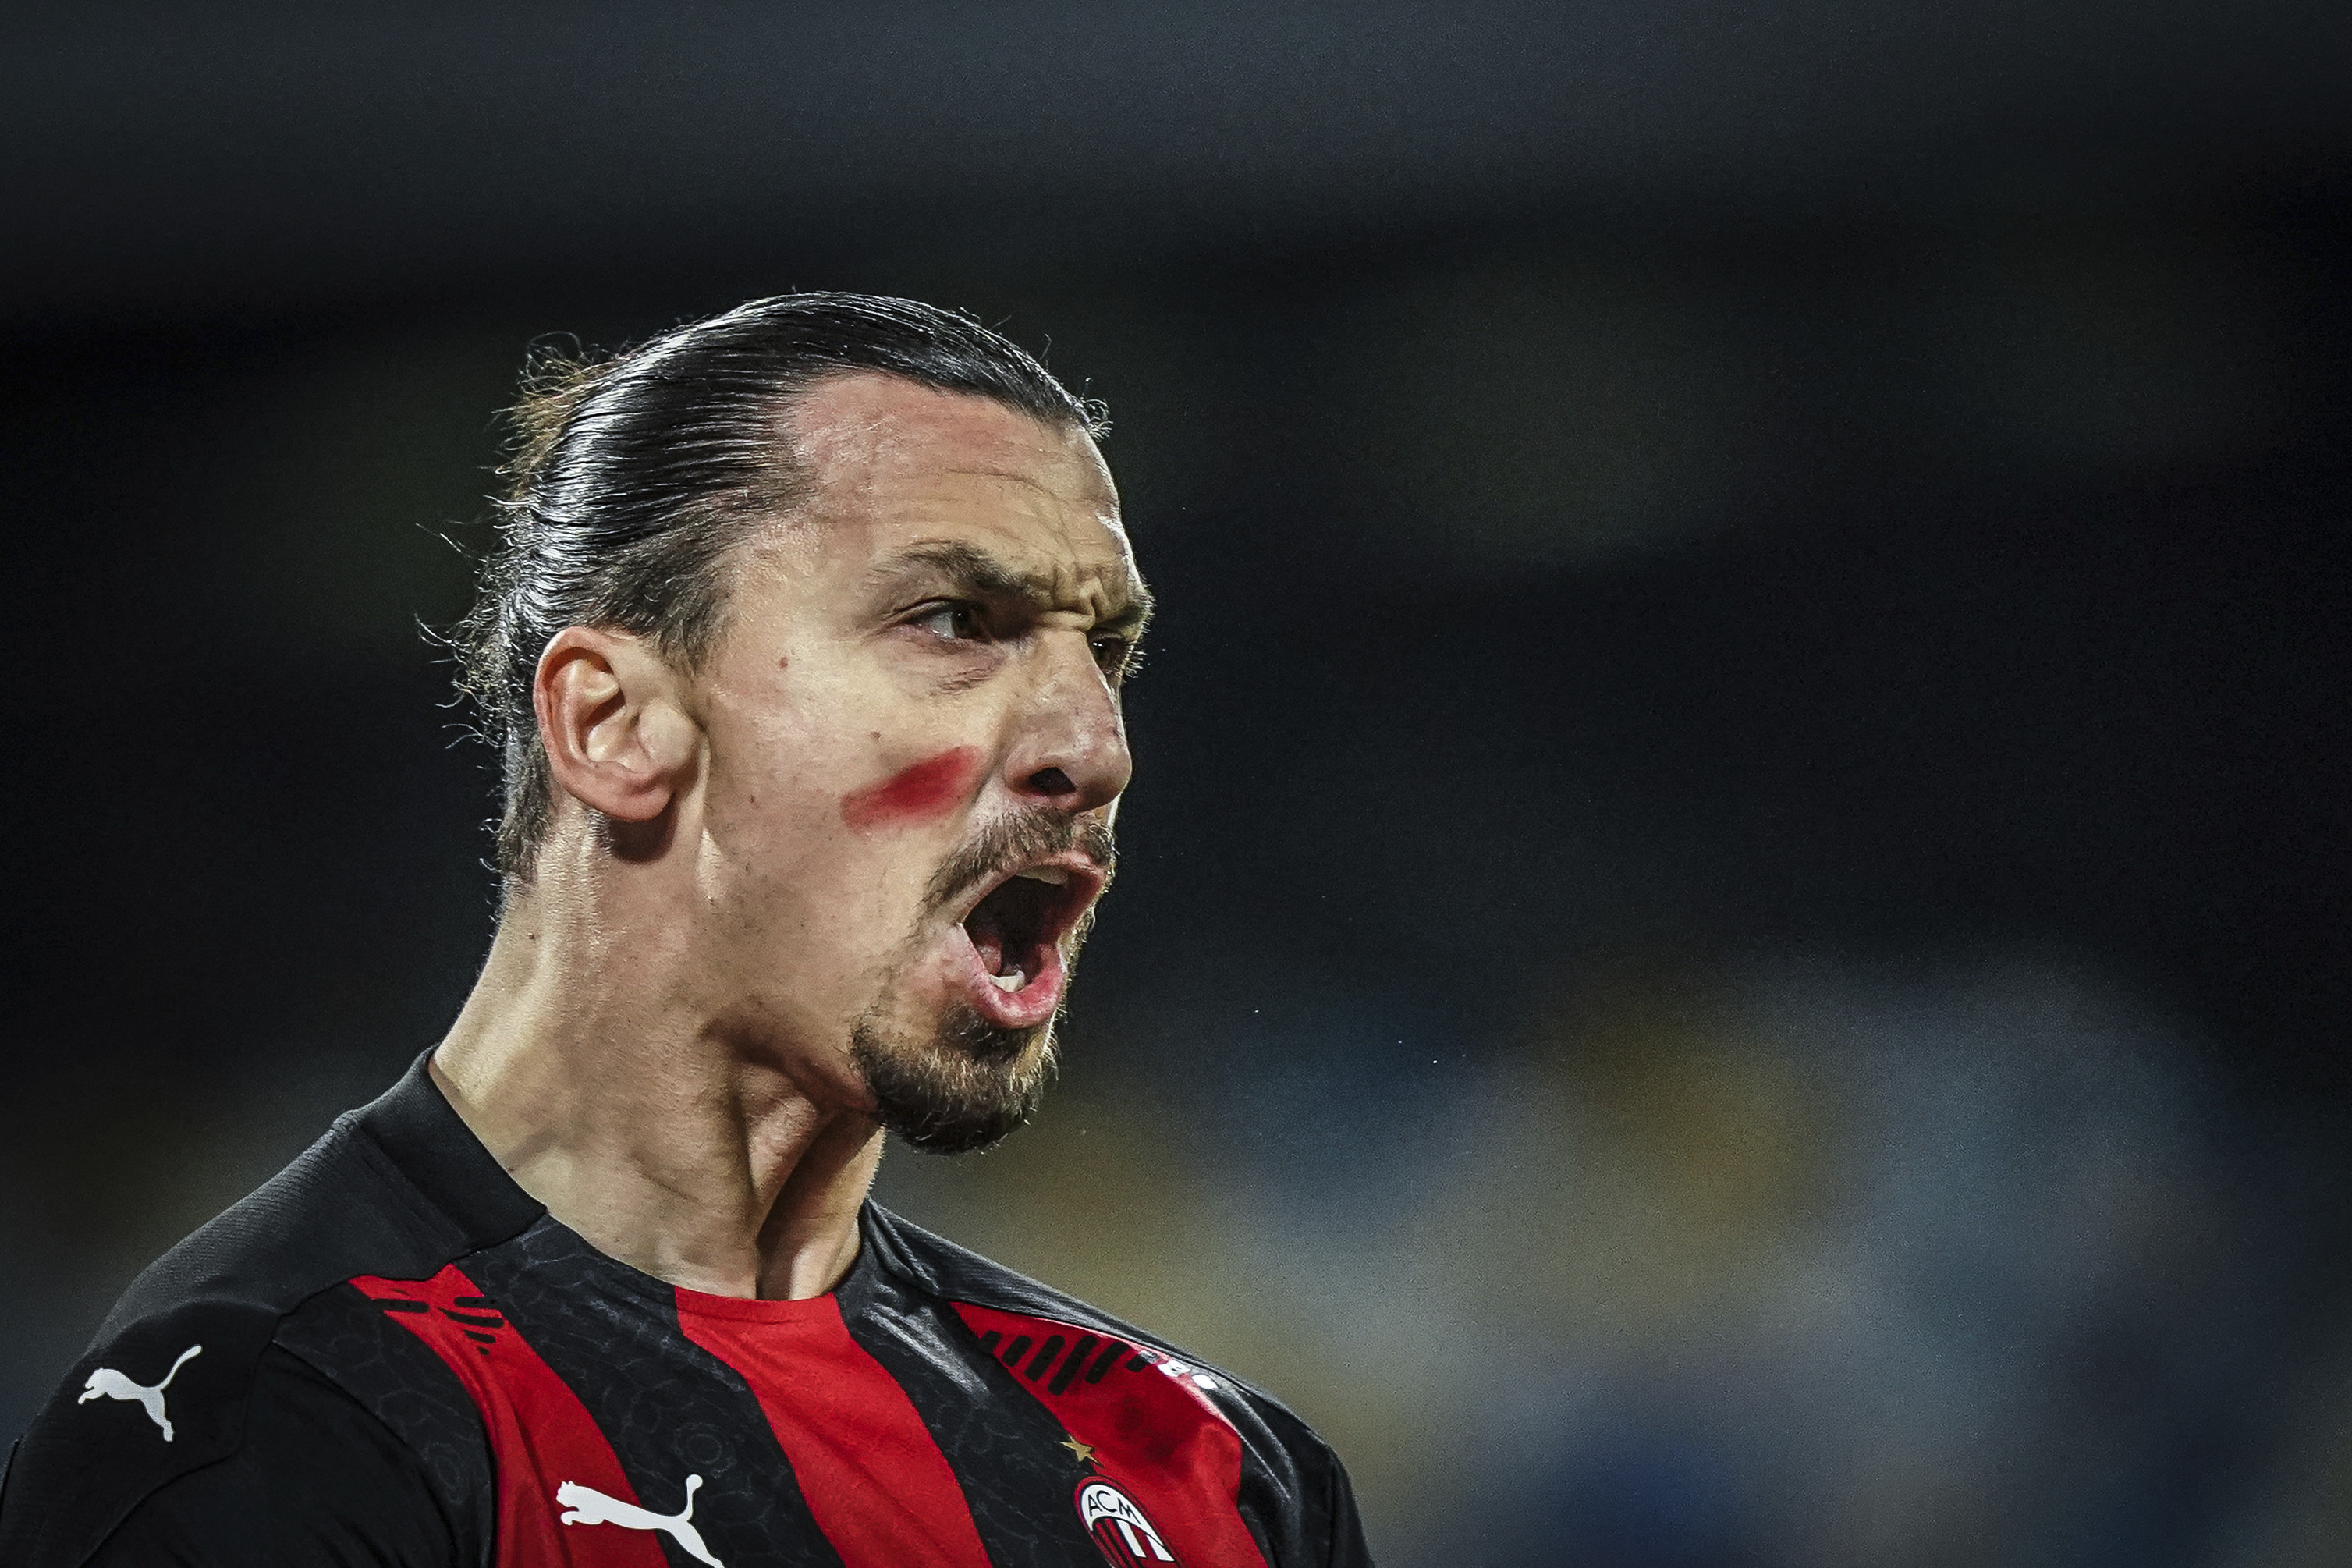 Report Zlatan Ibrahimovic Gareth Bale More To Object To Fifa 21 Likenesses Bleacher Report Latest News Videos And Highlights